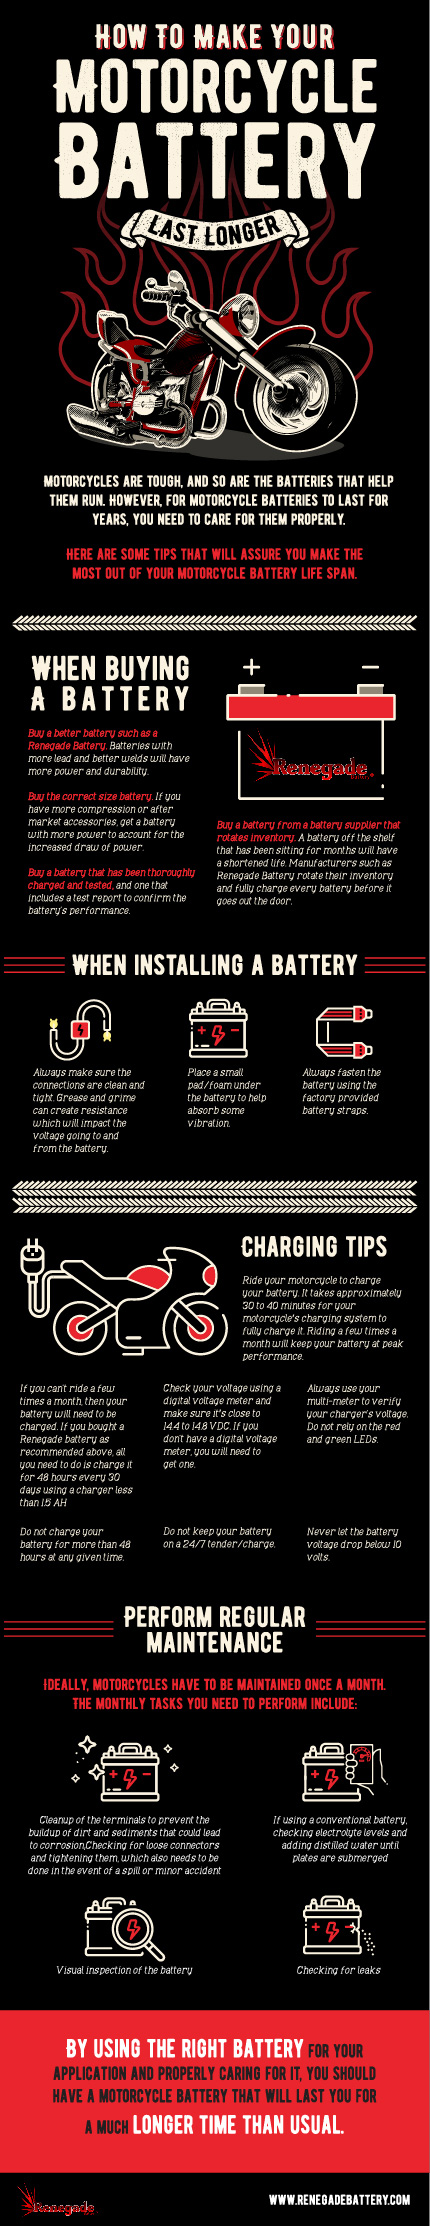 how to make your motorcycle battery last longer infographic